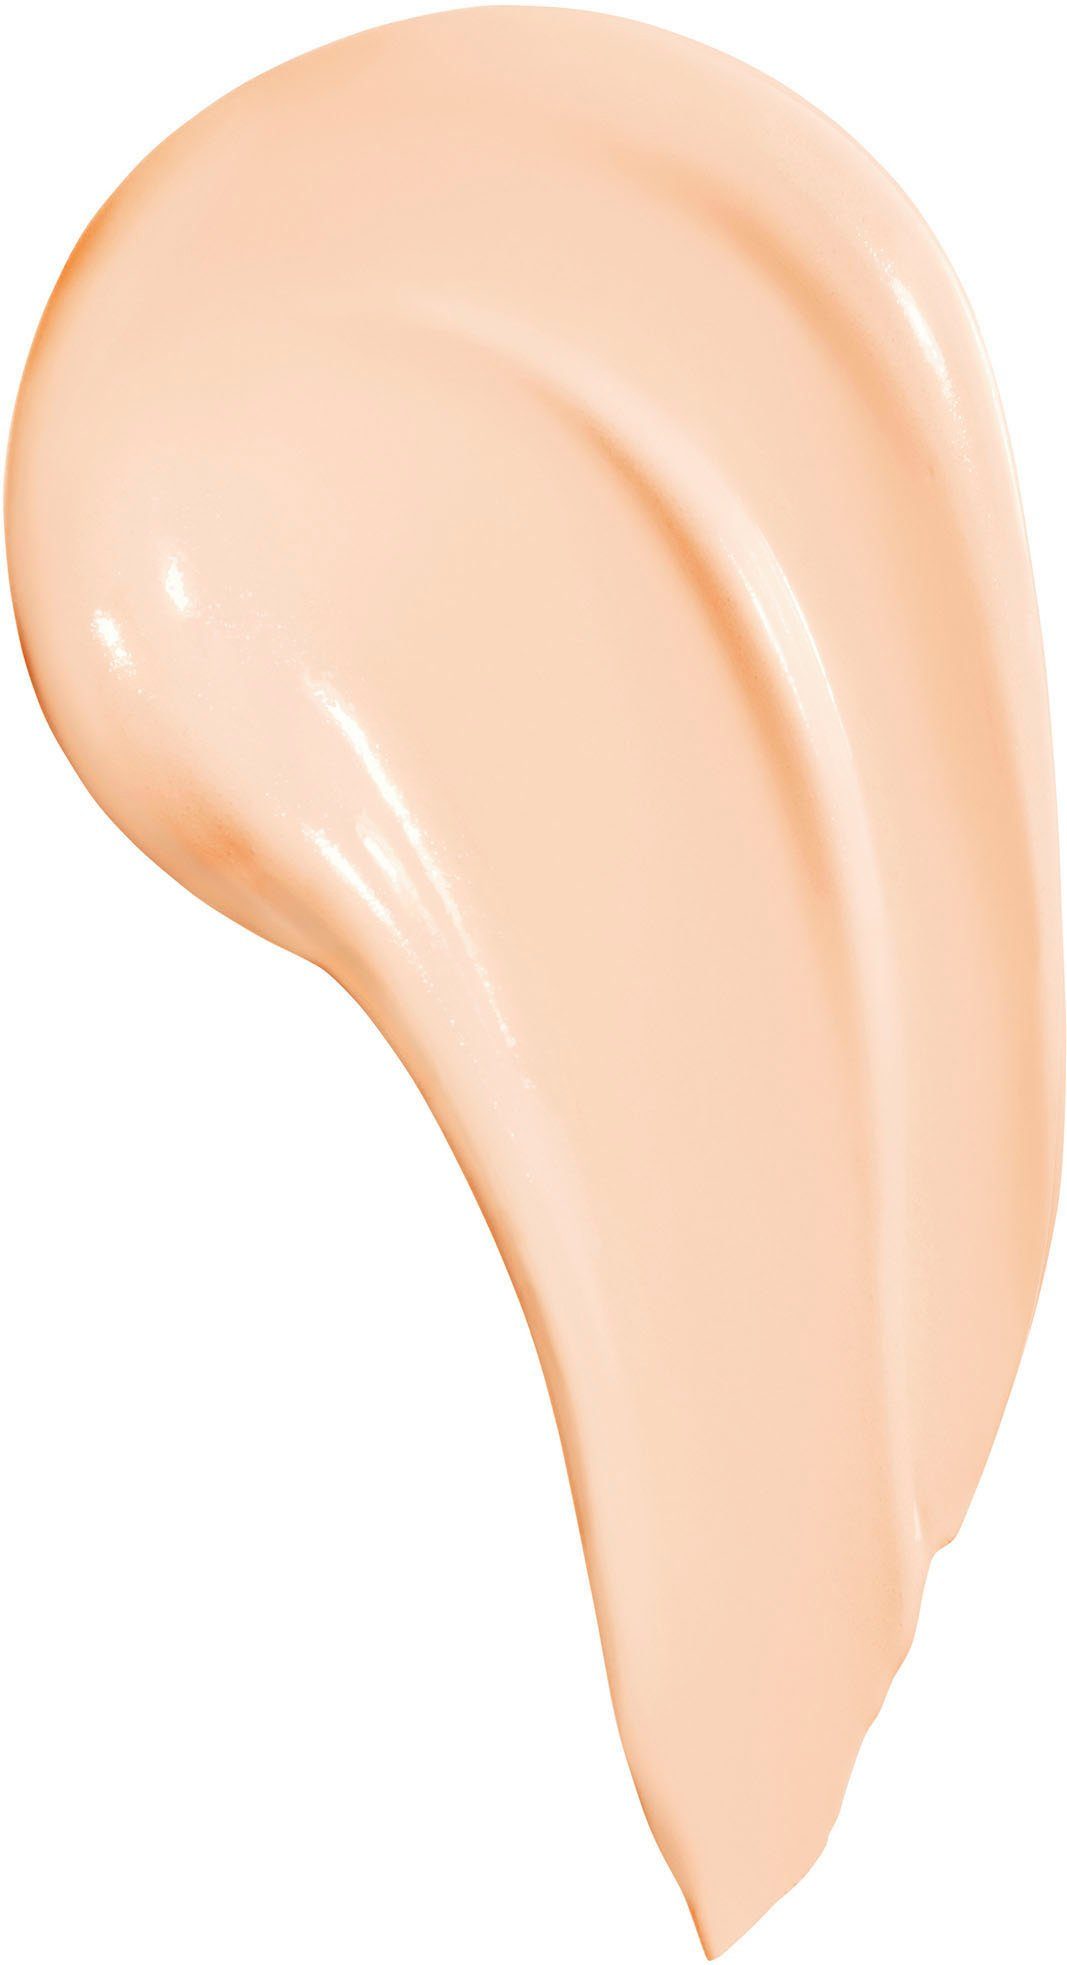 Foundation NEW 3 Super True Wear Stay YORK Active Ivory MAYBELLINE